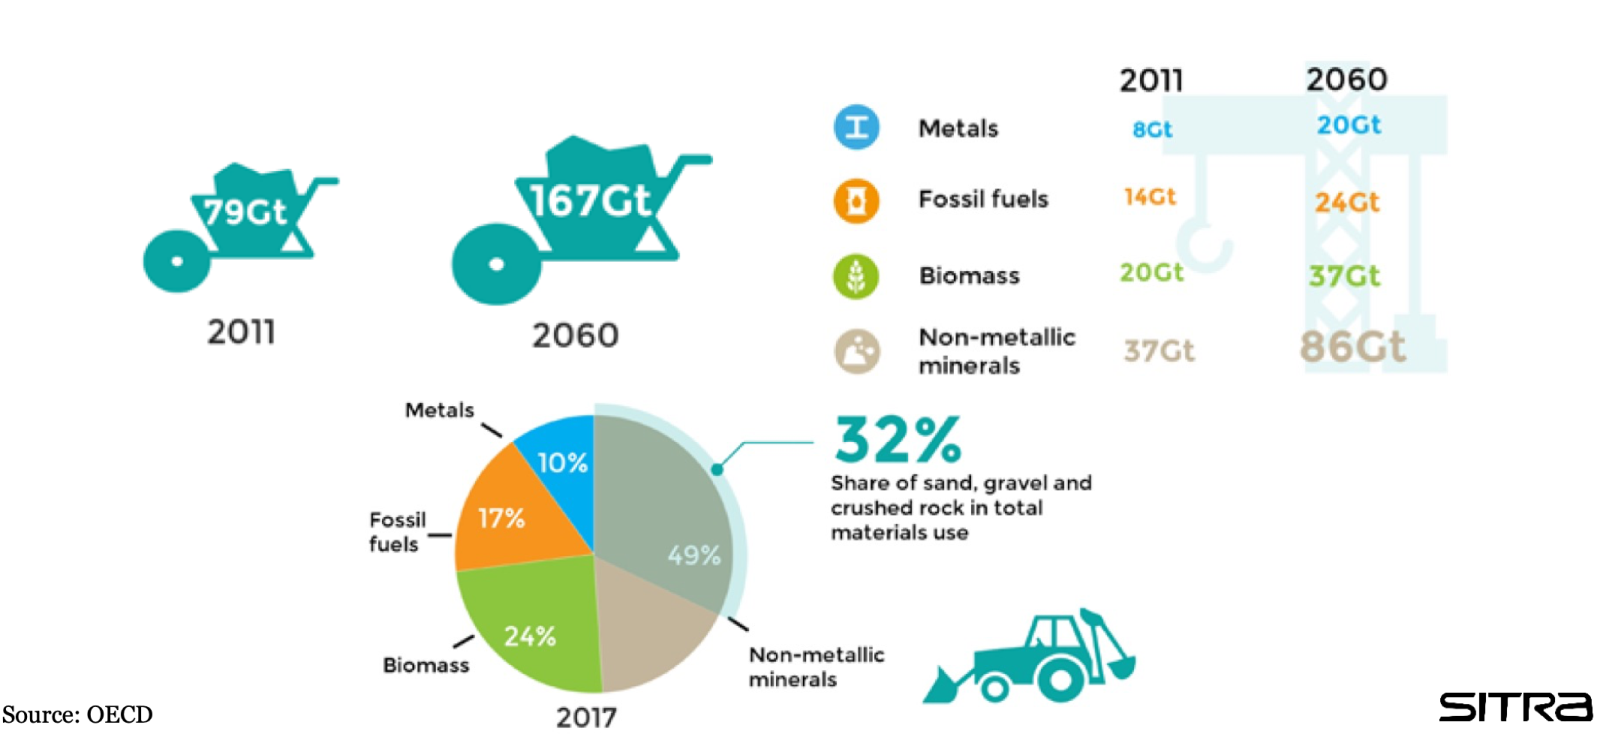 Global material consumption is projected to more than double by 2060 with current economic model.